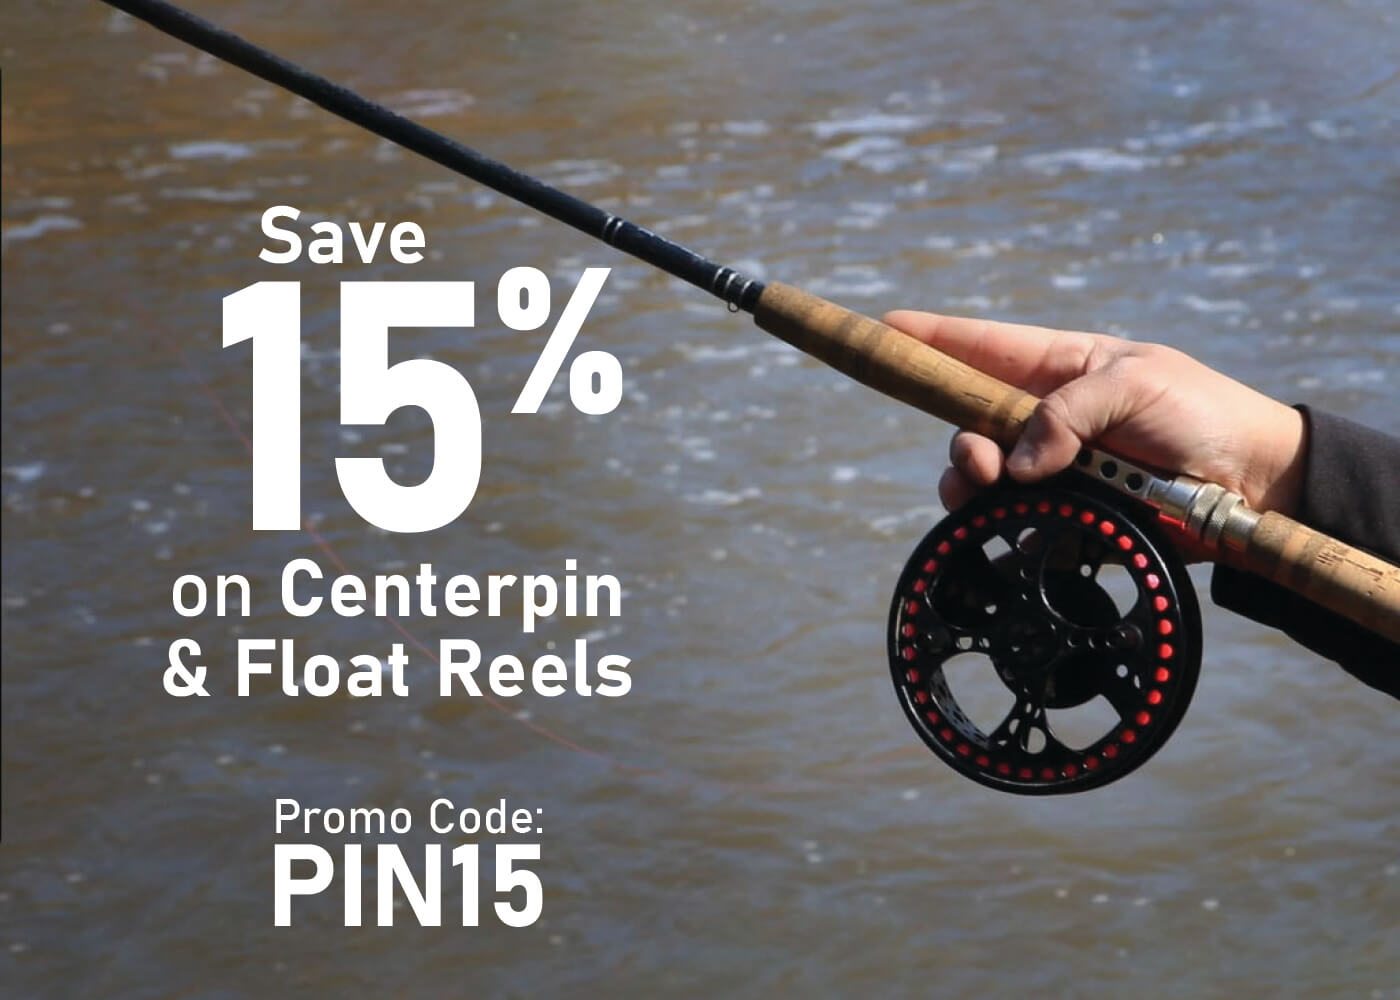 Save 15% on Centerpin & Float Reels